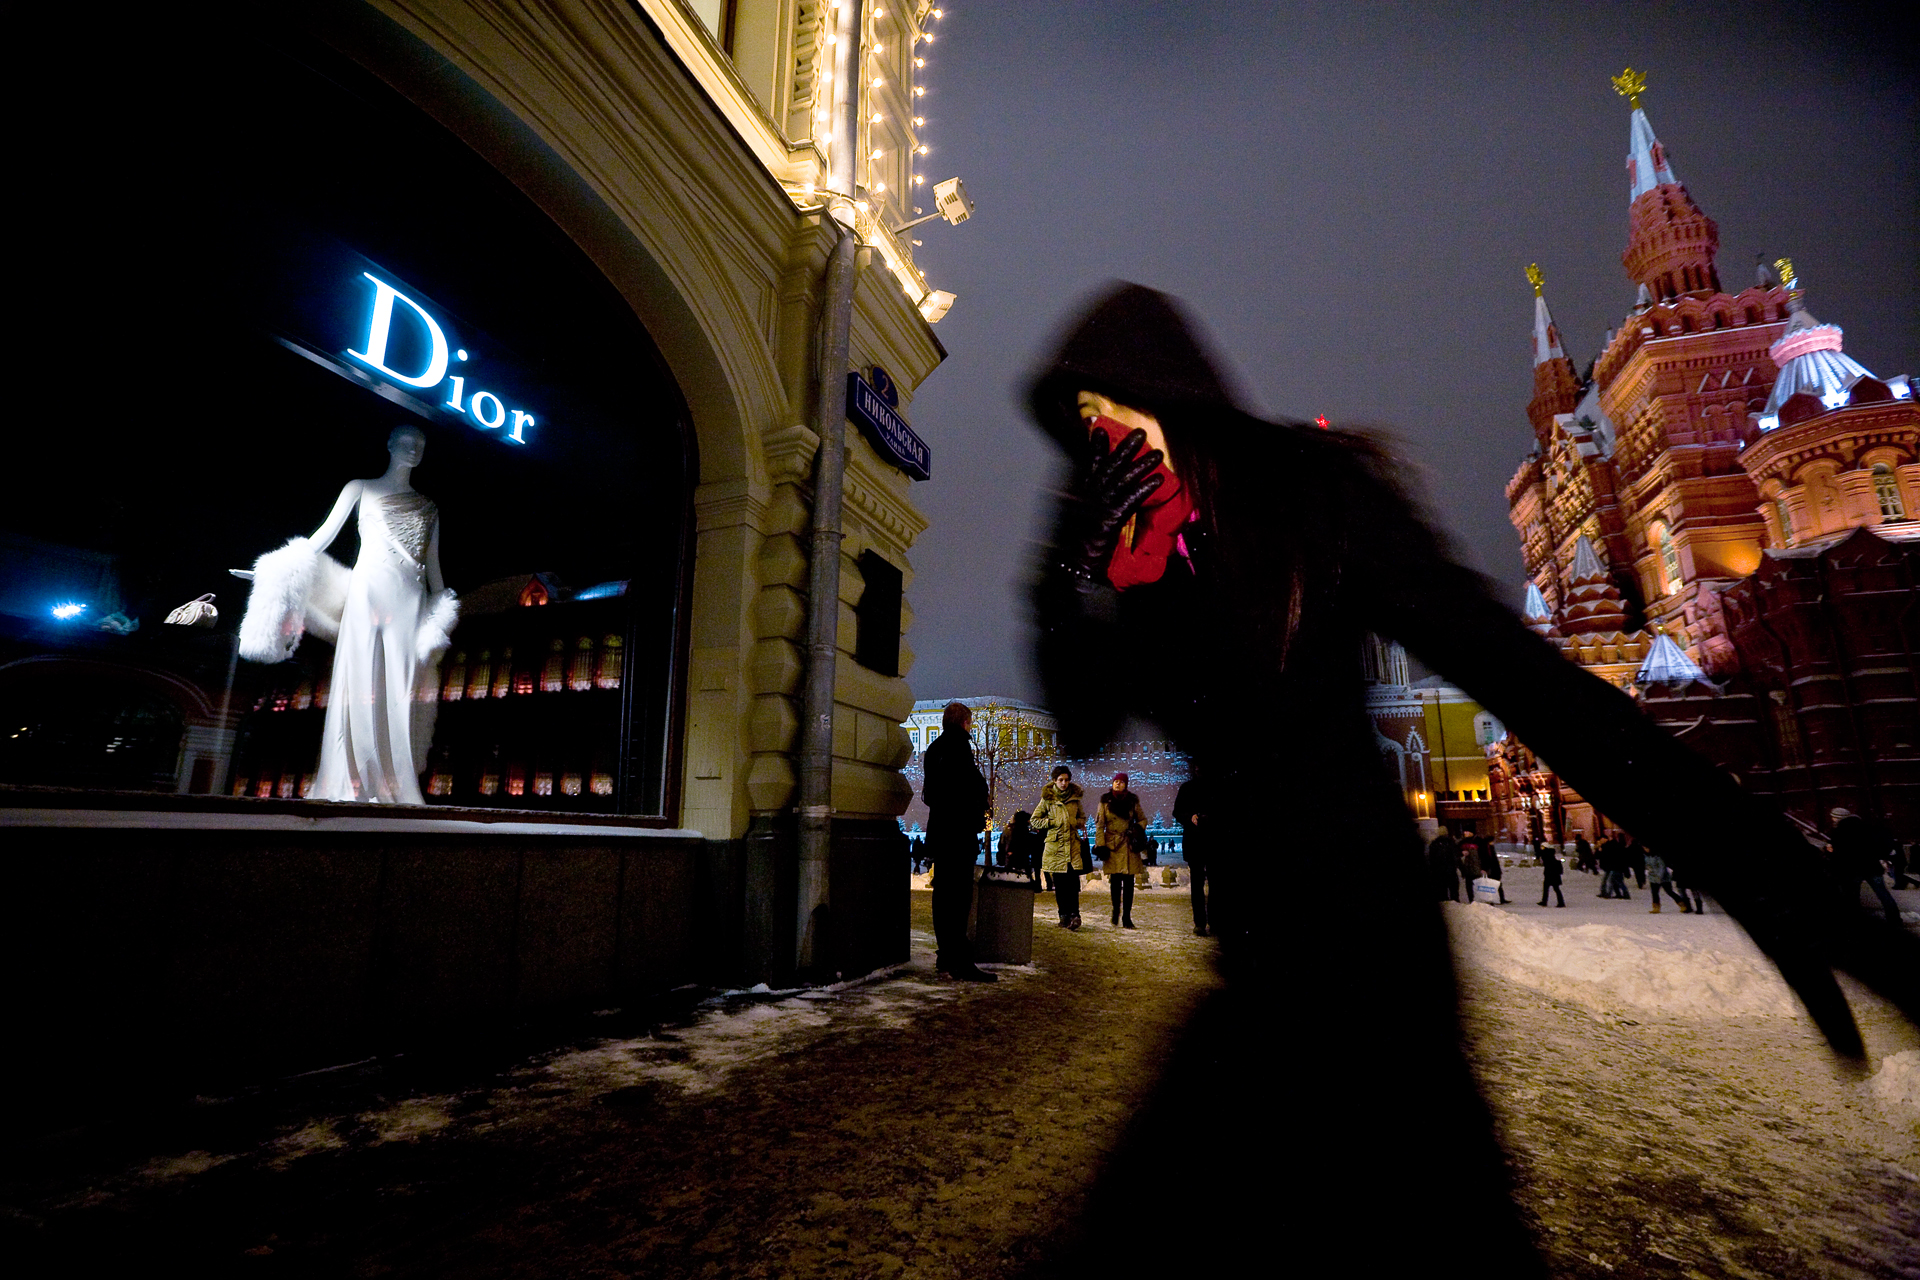  6:01PM - A shopper scythes through bitter cold to reach a boutique on Red Square. These materialistic days, Marx and Lenin can't compete with Dior and Armani for the hearts of the consuming class. 